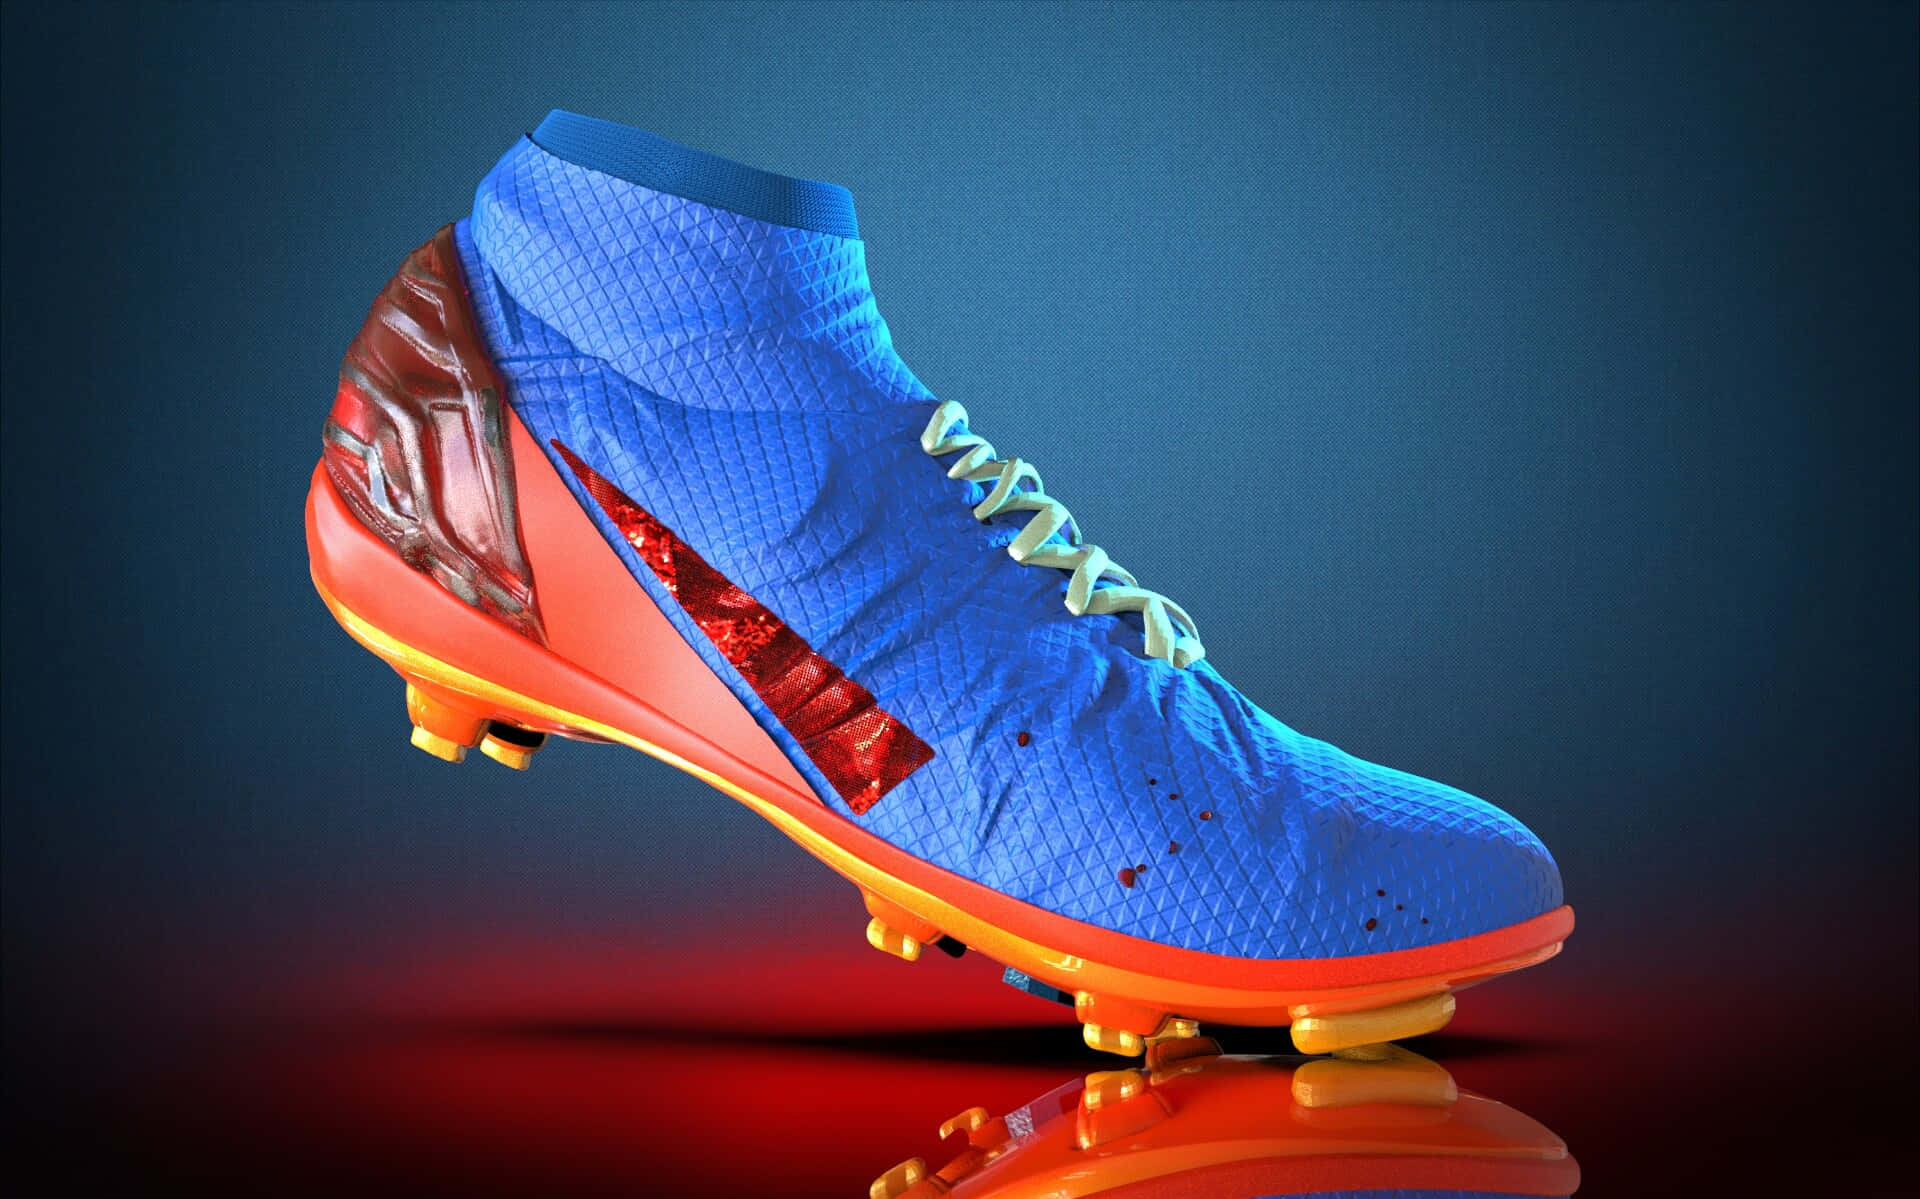 Pair Of High-performance Soccer Cleats Wallpaper